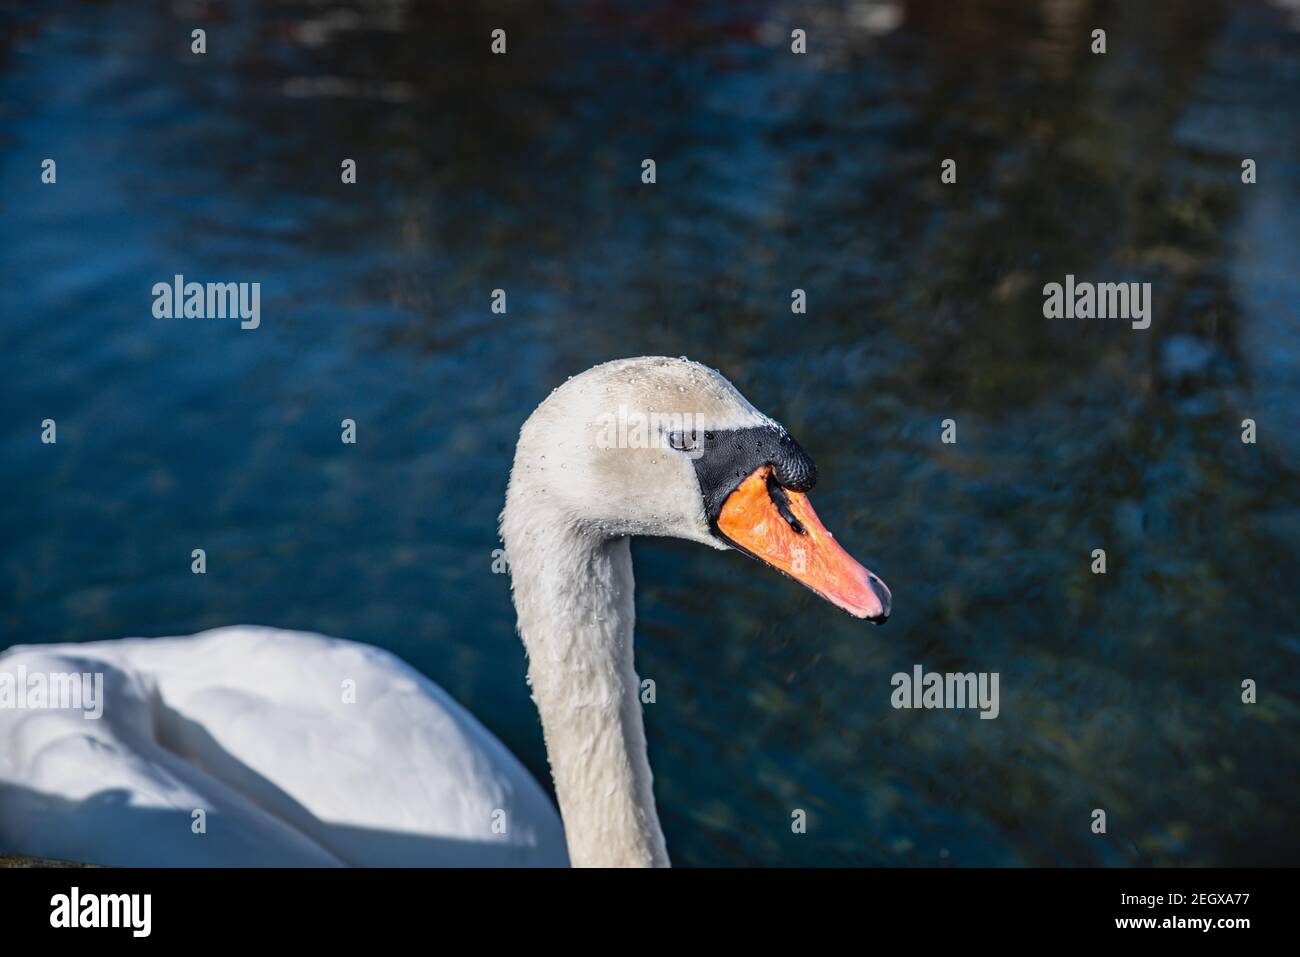 A white Mute Swan face detail. Drops of water are on the plumage and the beak as it swims in the harbour water. Closeup of a white Cygnus Olor face Stock Photo